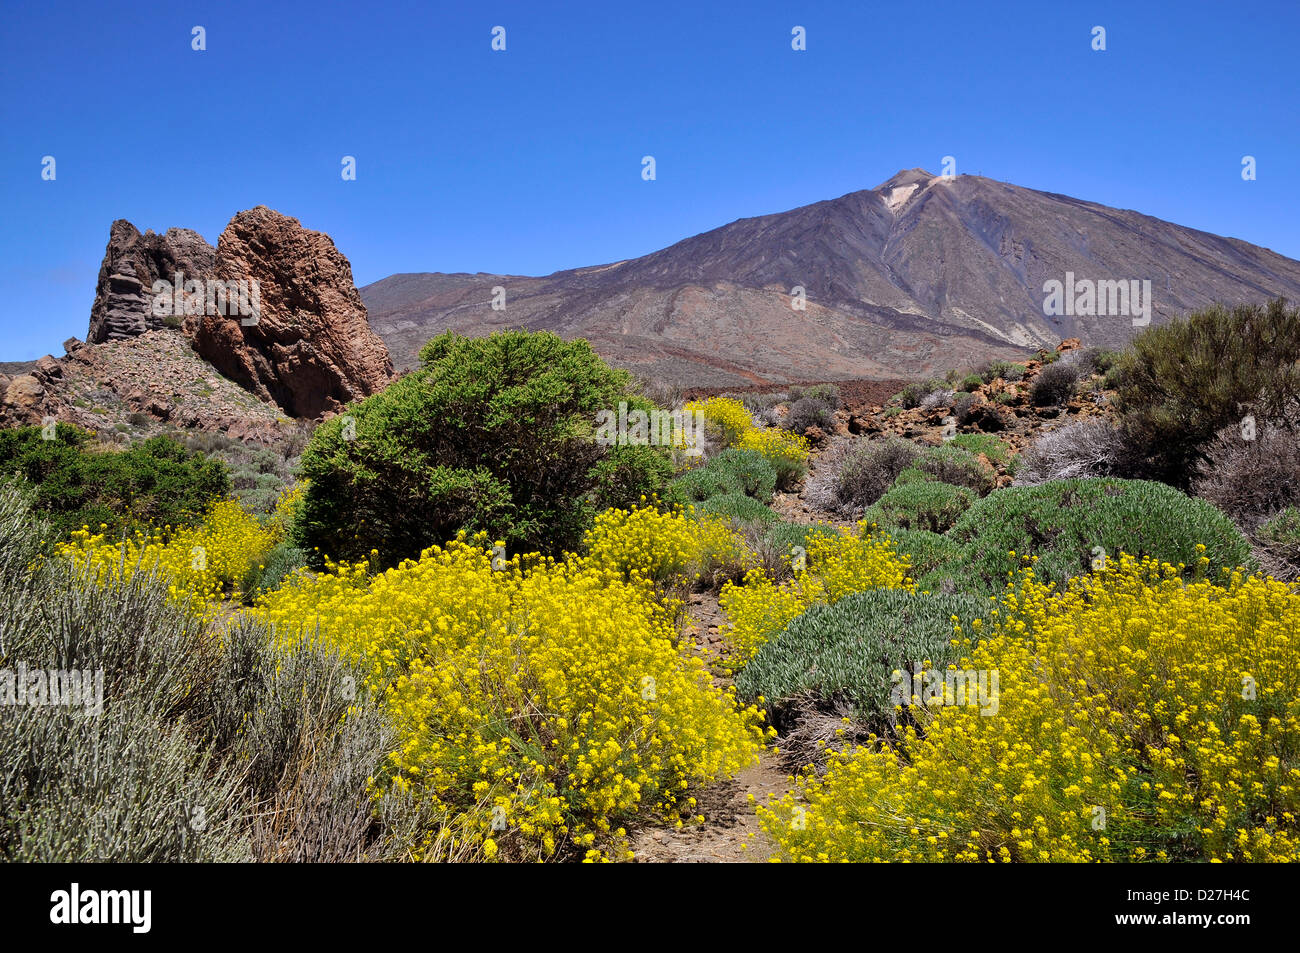 Mount Teide or, in Spanish, Pico del Teide (3718m), is a volcano at Tenerife in the Spanish Canary Islands. Stock Photo